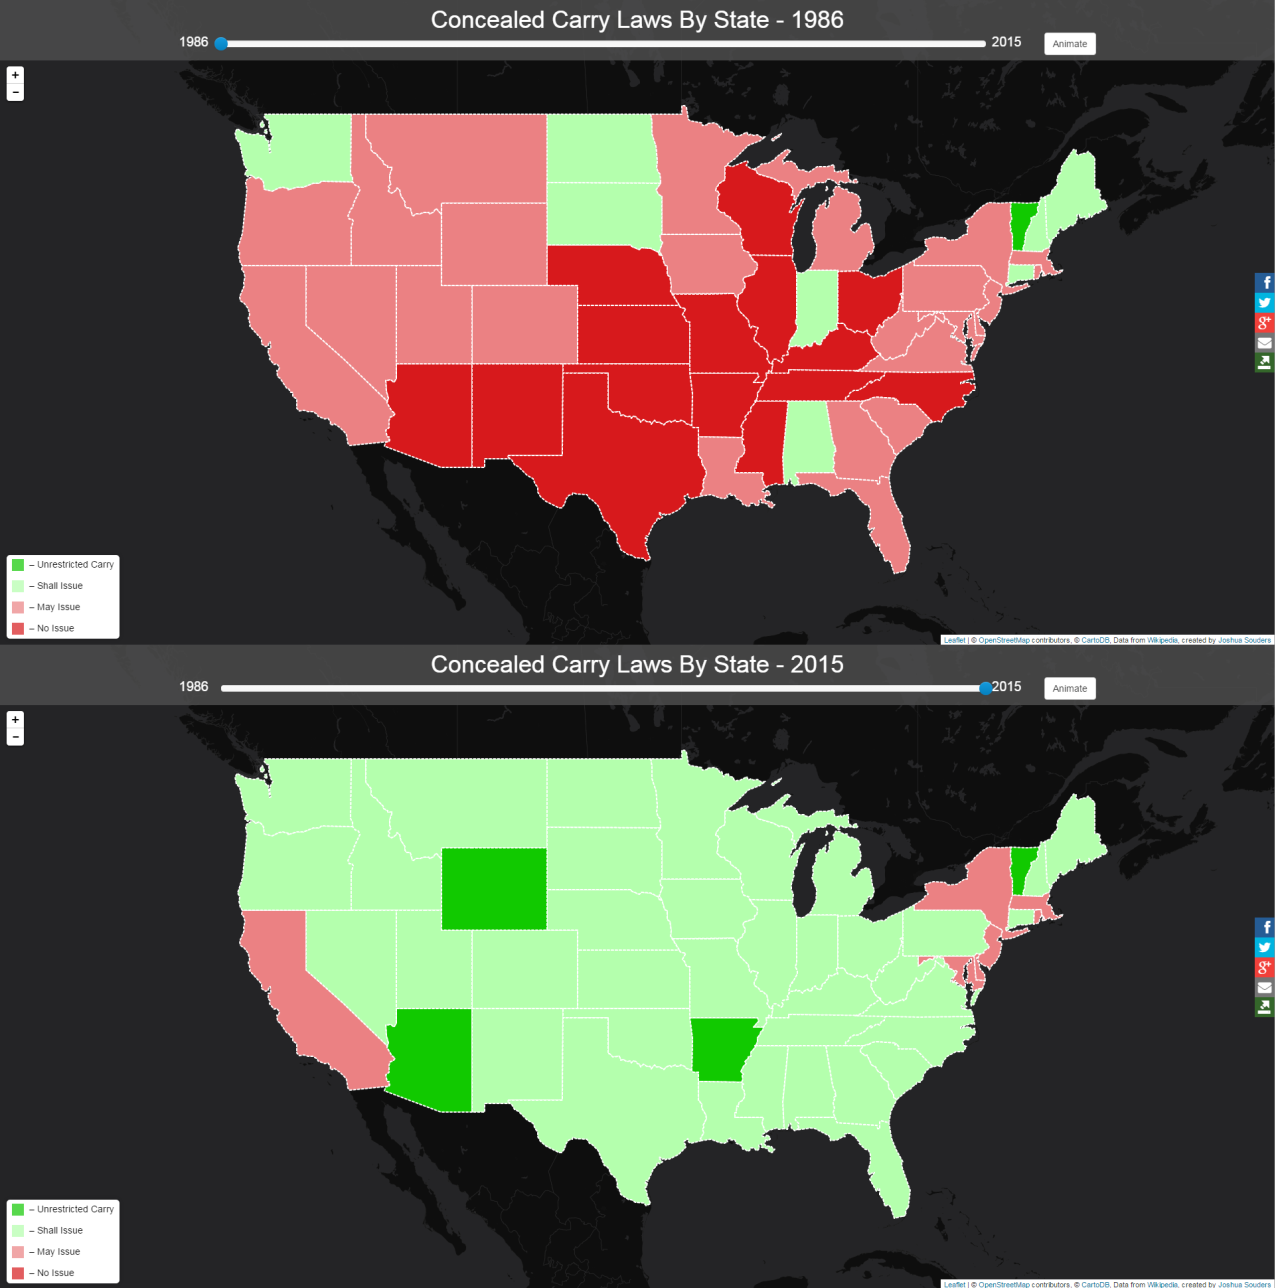 Concealed Carry Laws By State, 1984 vs 2015  - Maps on the Web